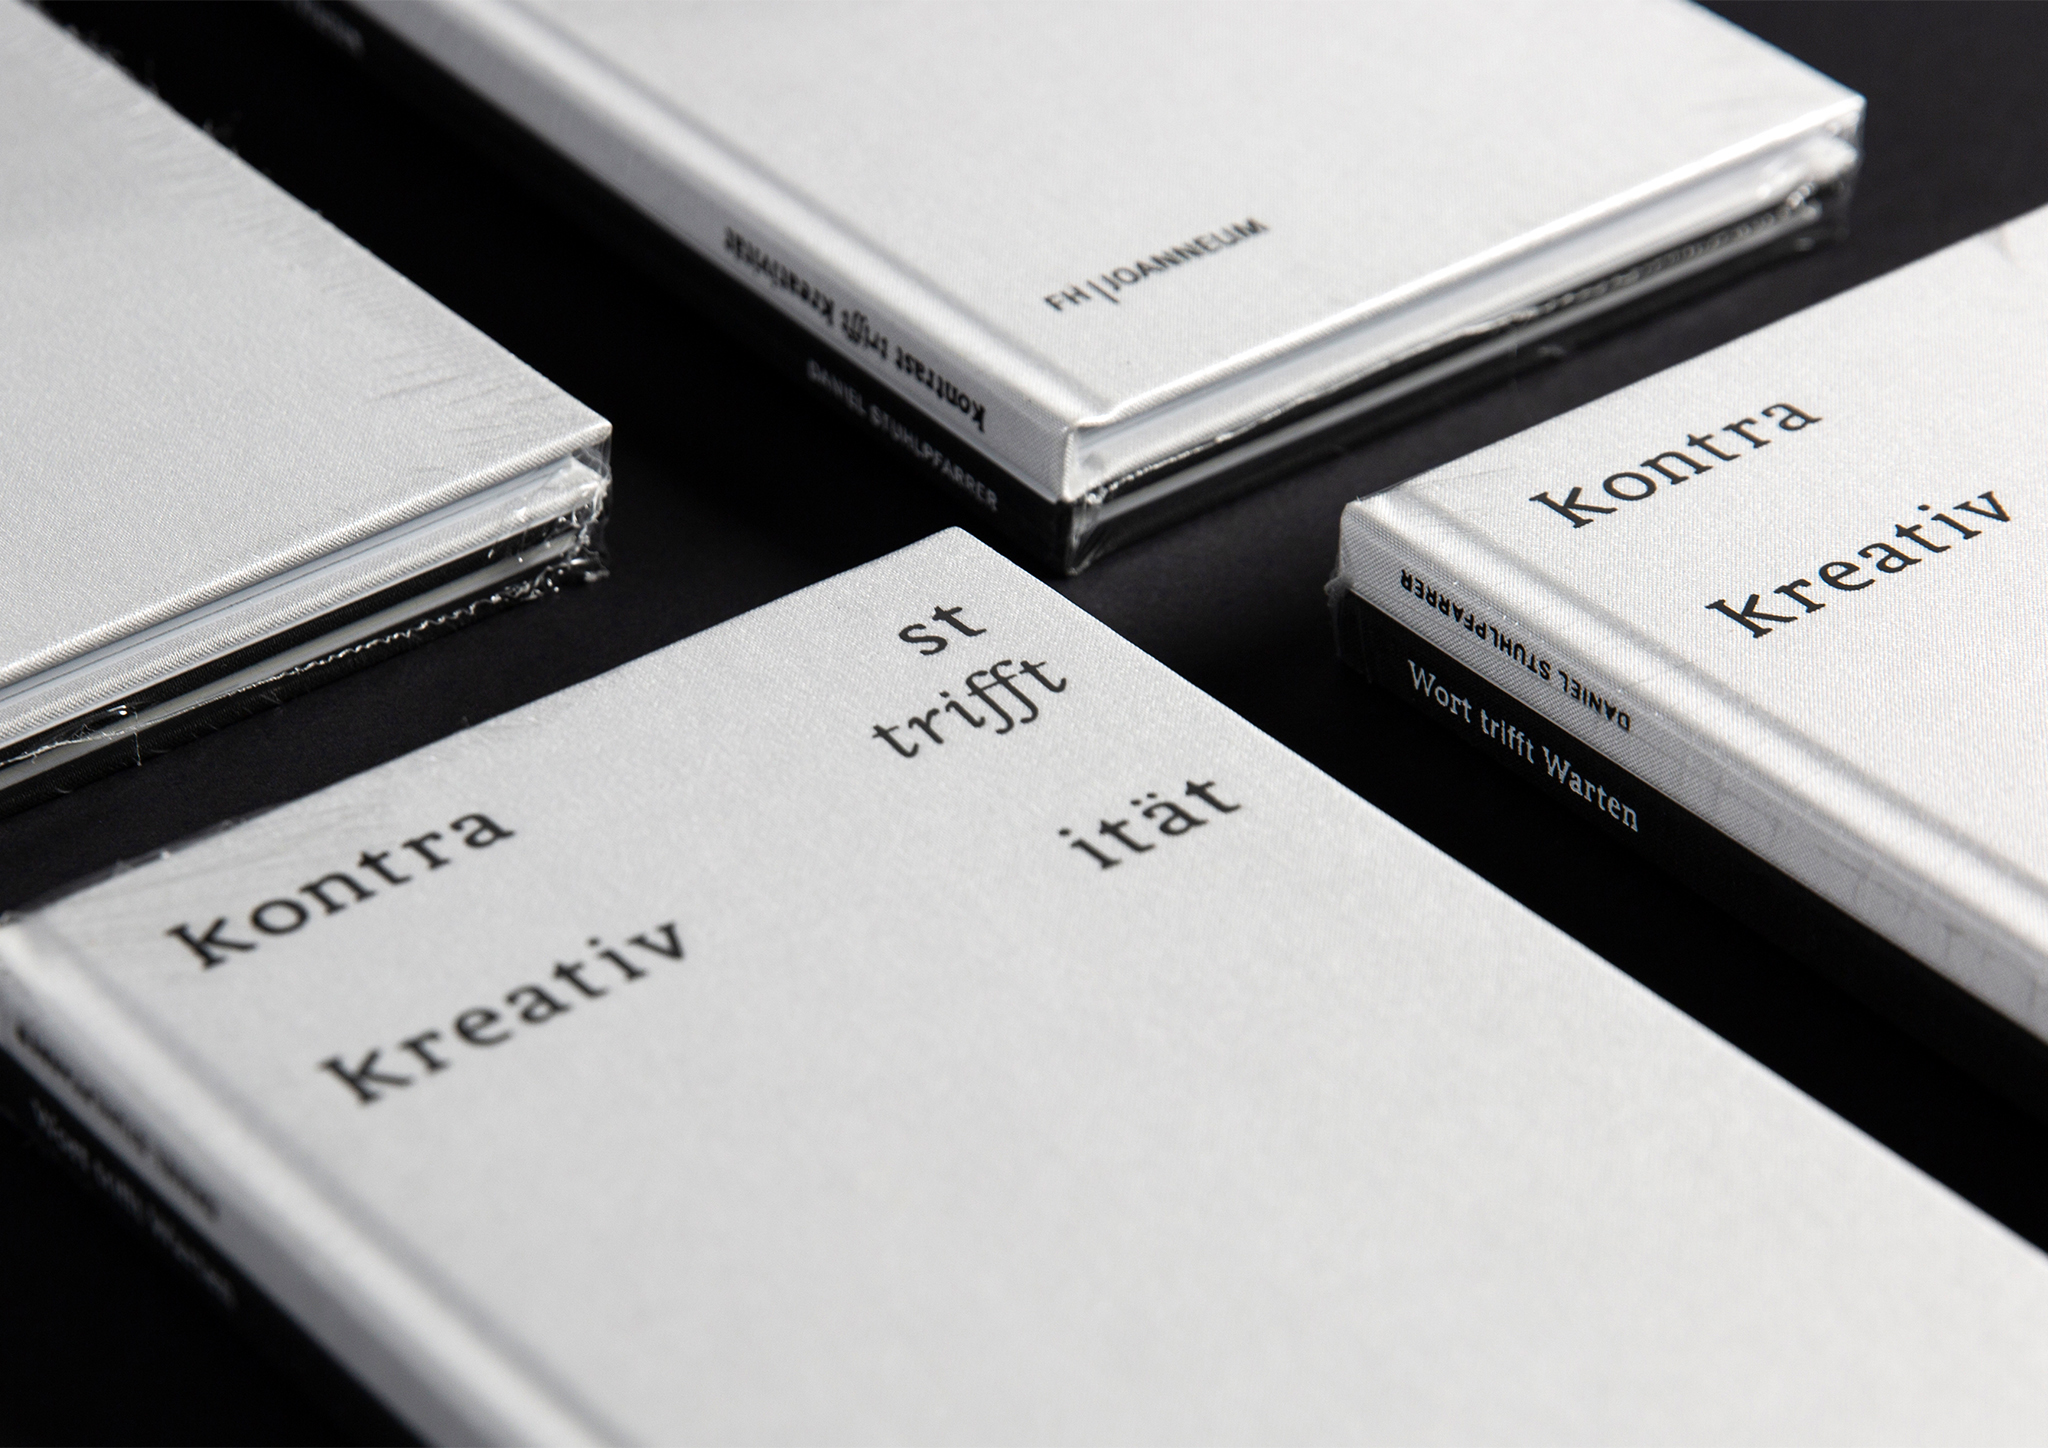 Contrast meets Creativity & Word meets Waiting Cover Overview